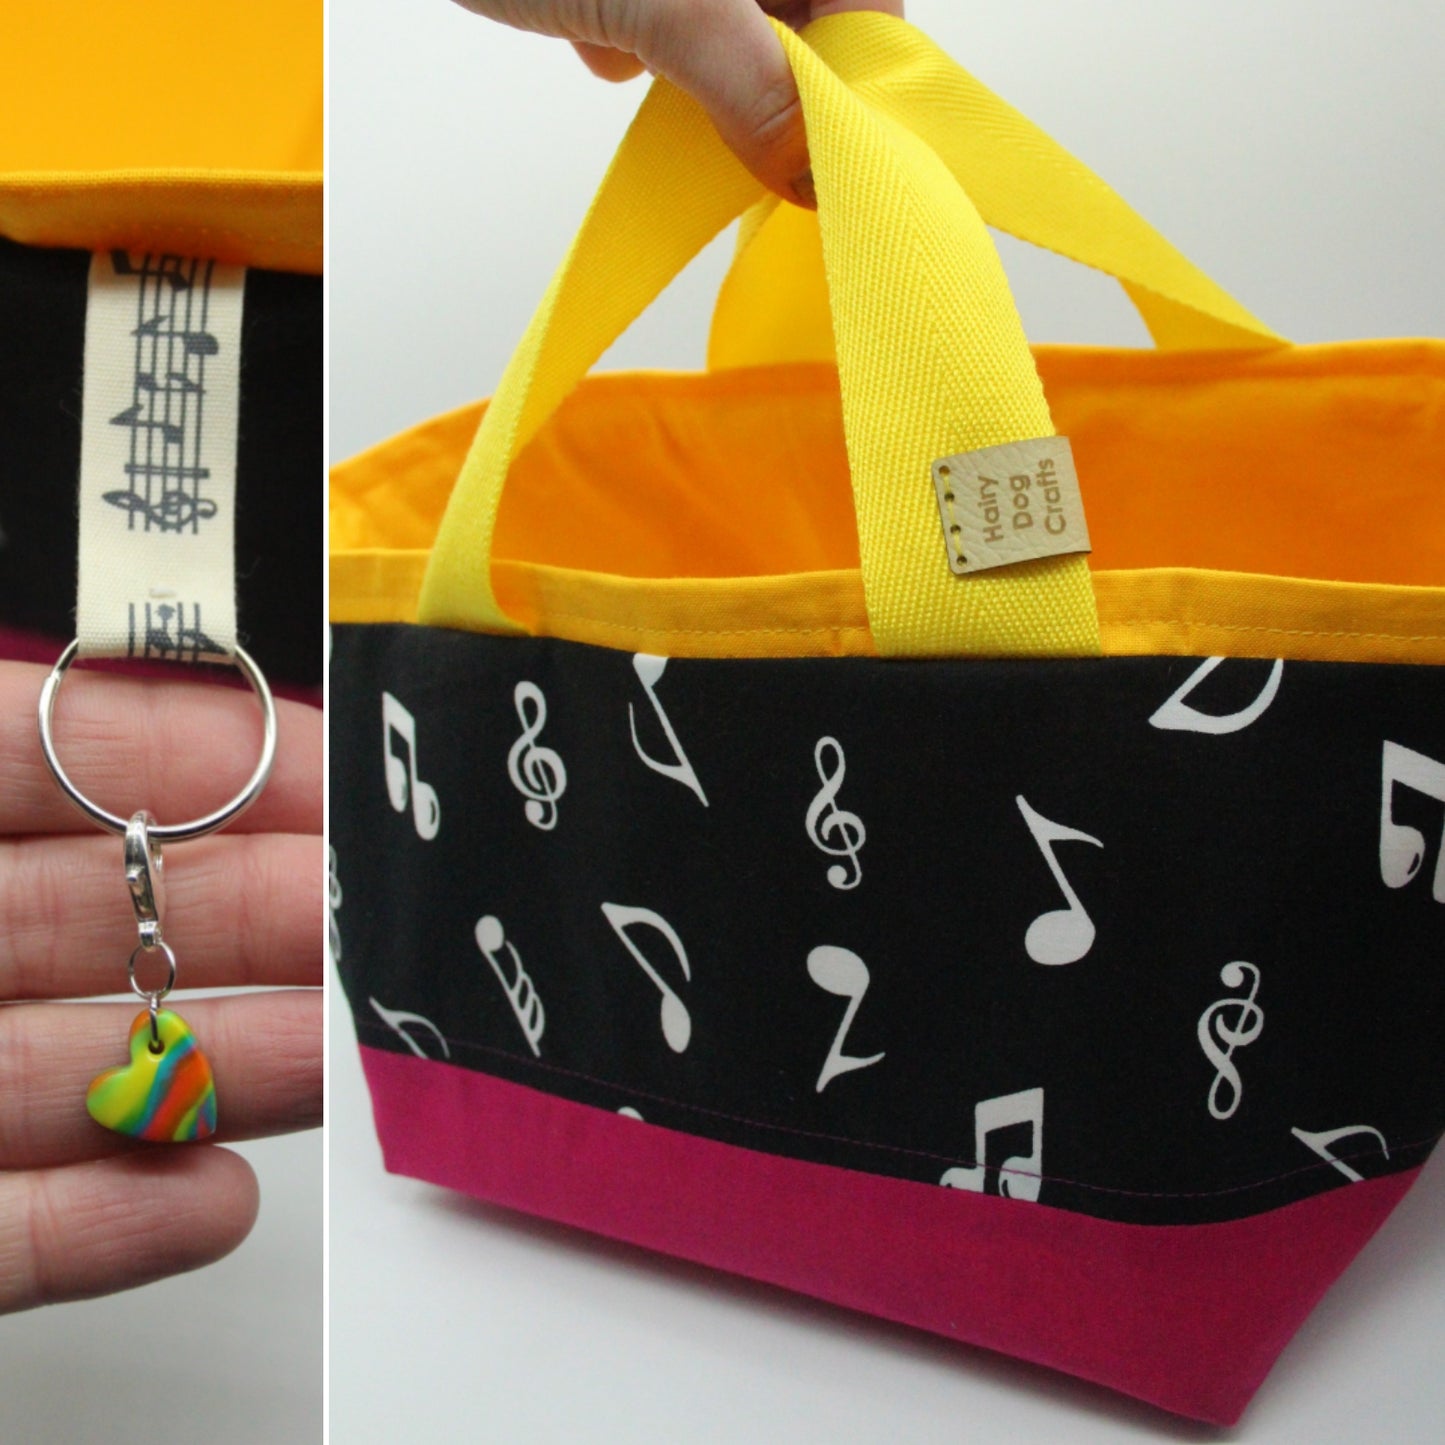 Music Project Bag